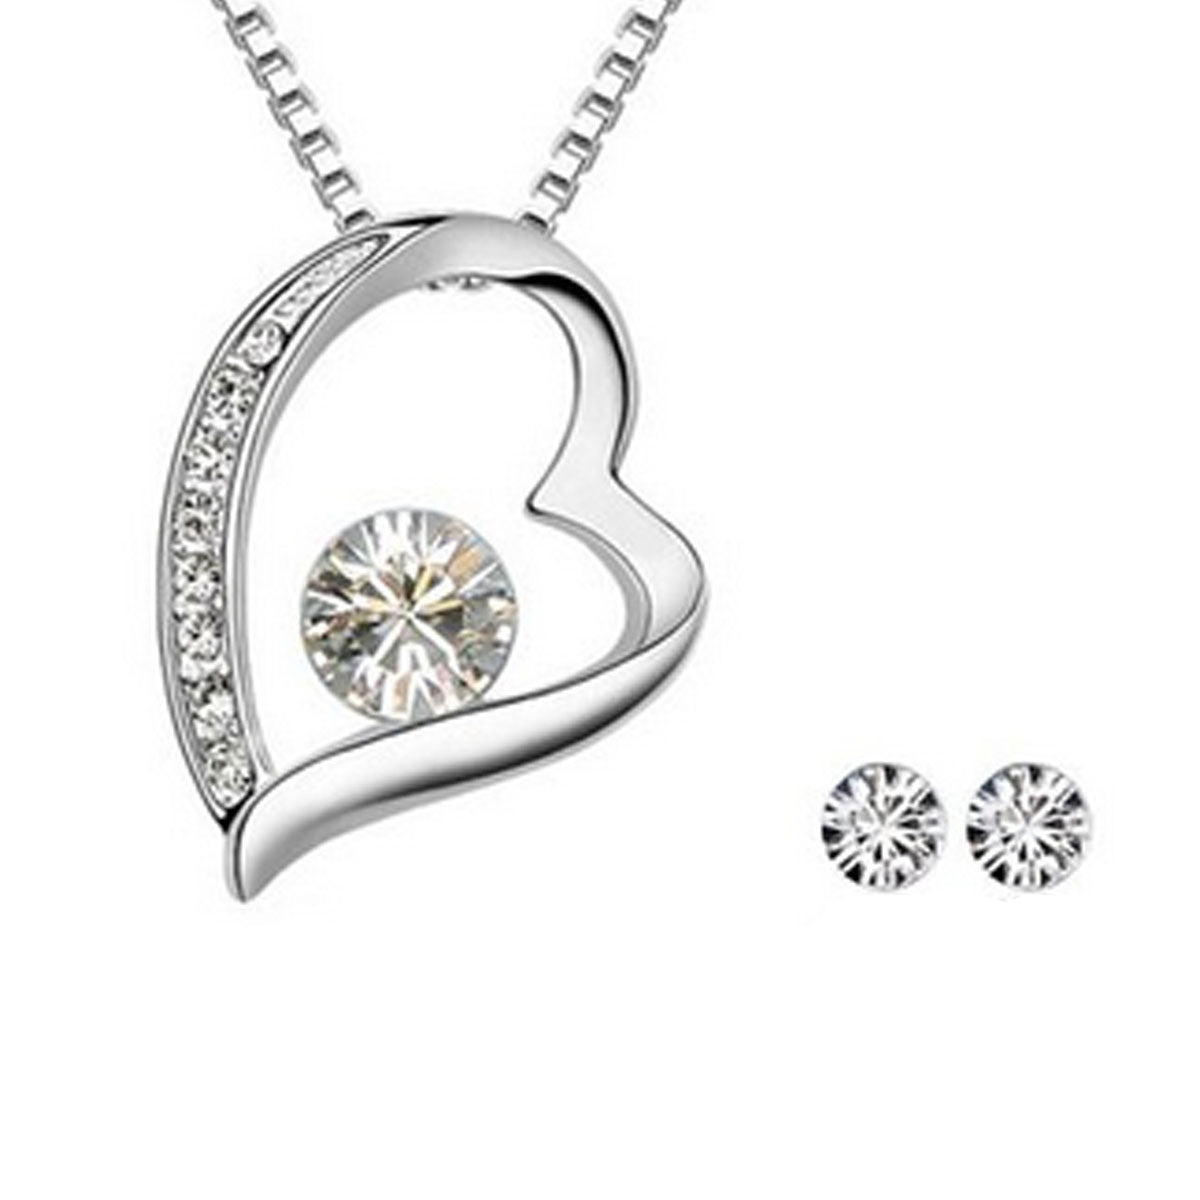 White Crystal Jewelry Set - Heart Pendant Necklace and Earrings